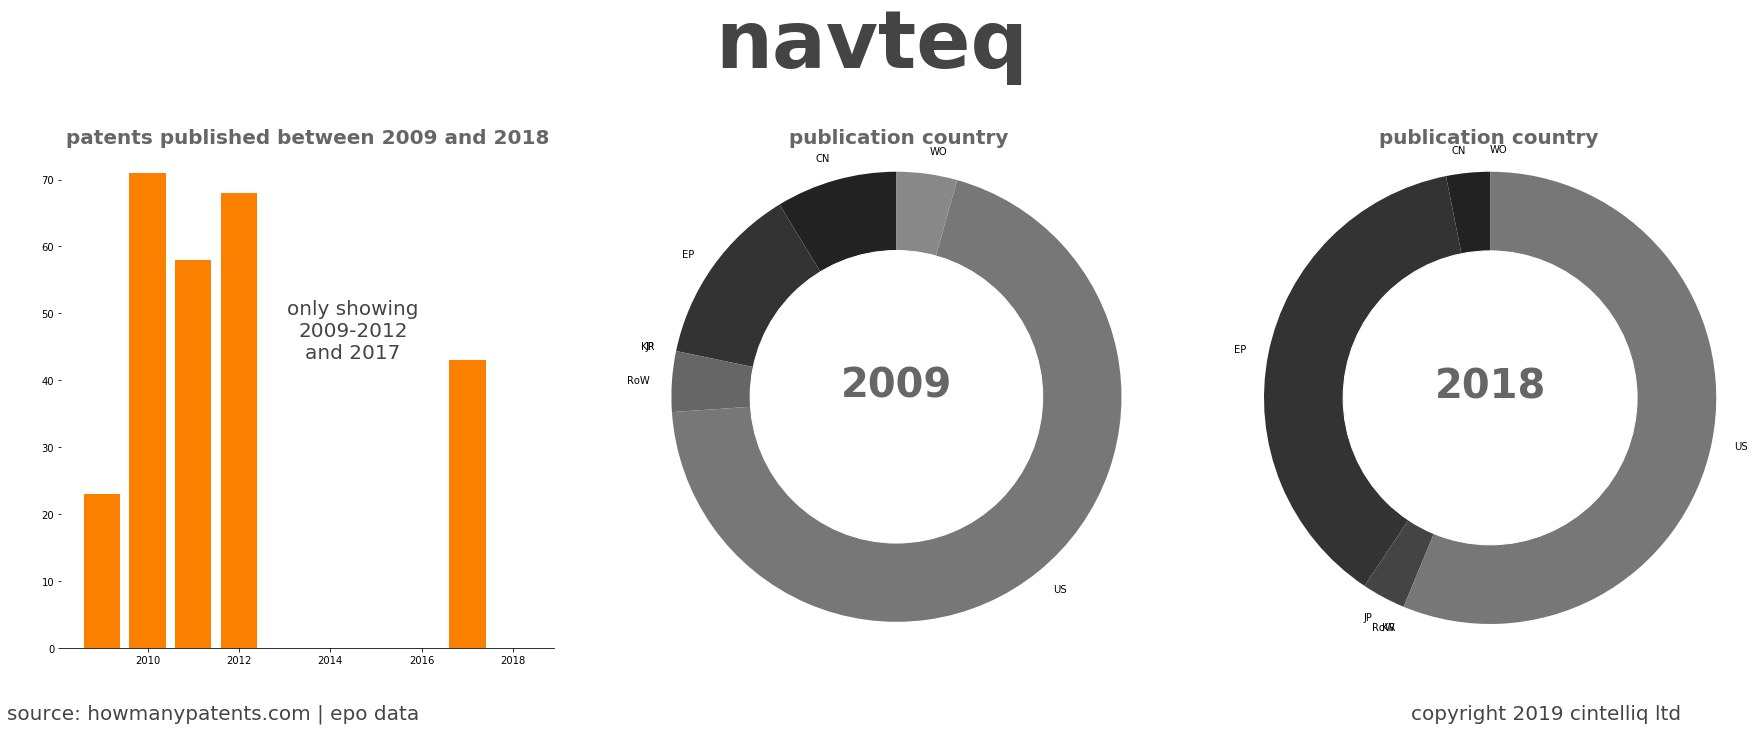 summary of patents for Navteq